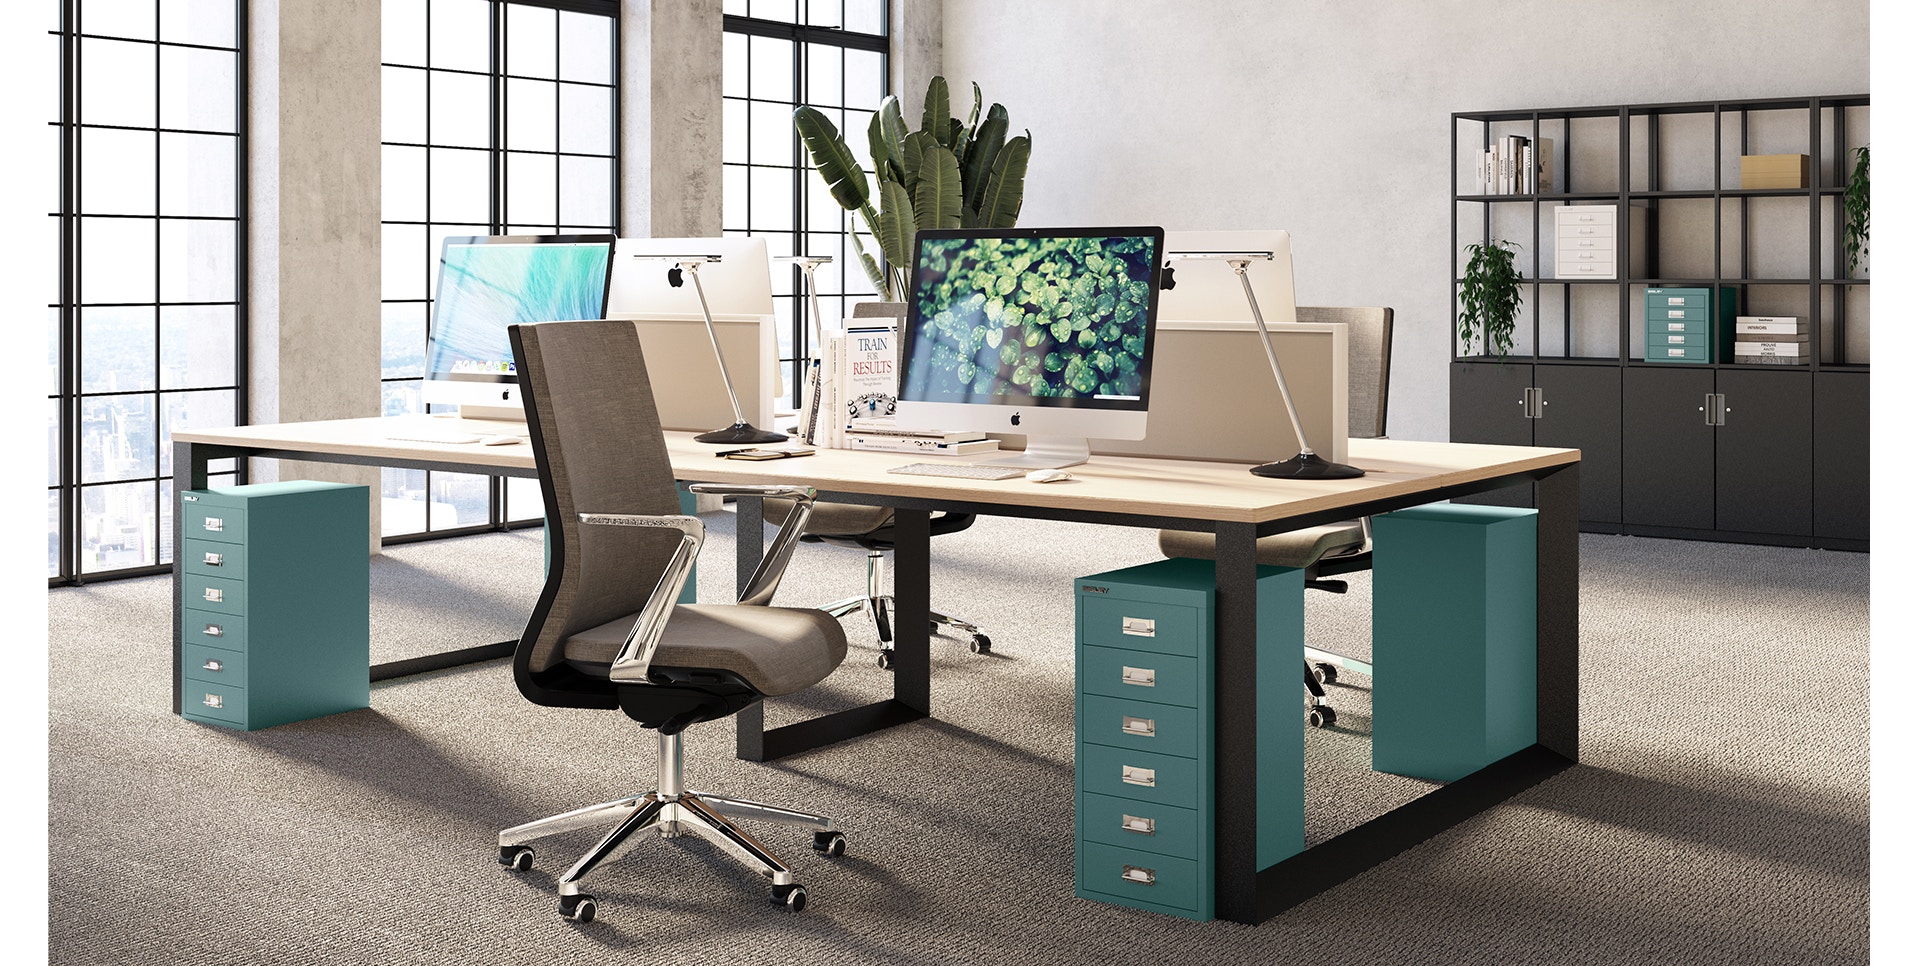 Bisley Office Furniture - Desk and Chair